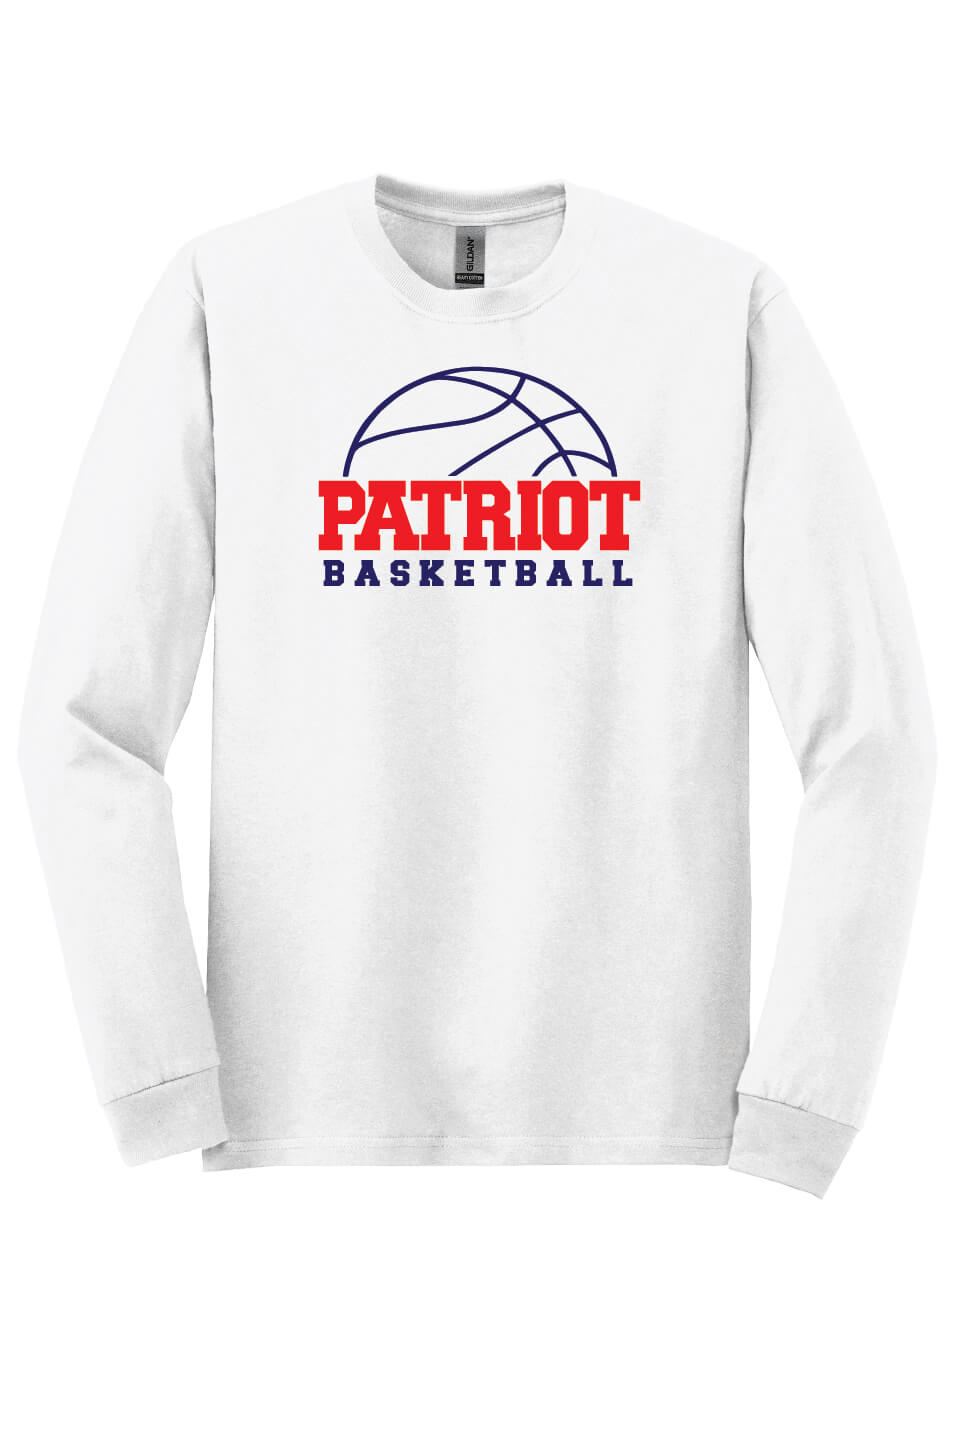 Patriots Basketball Long Sleeve T-Shirt (Youth) white